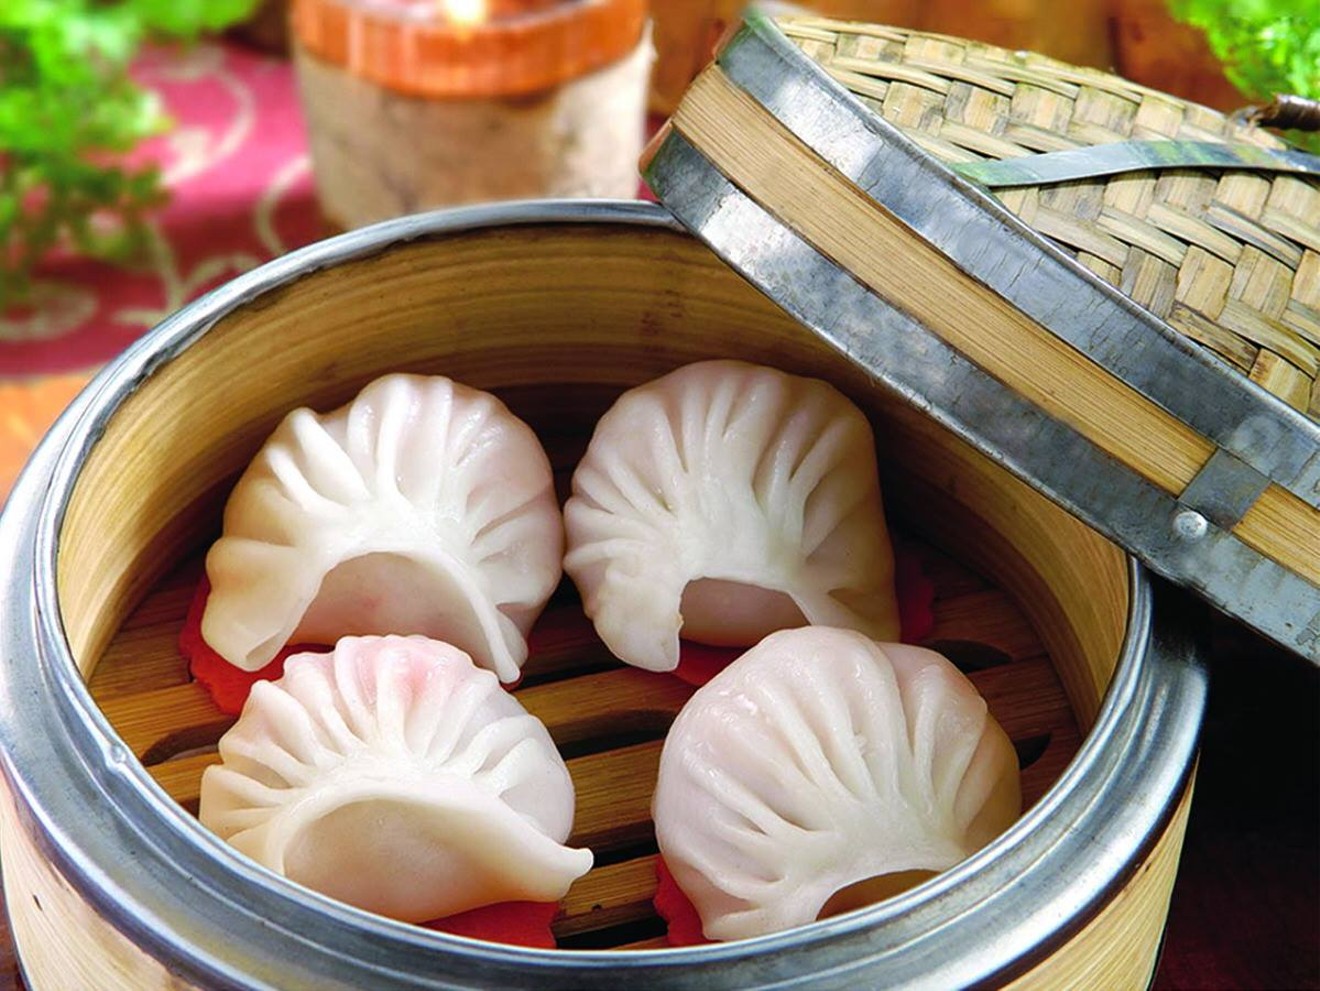 Perfectly pleated dumplings are a good sign when enjoying dim sum.